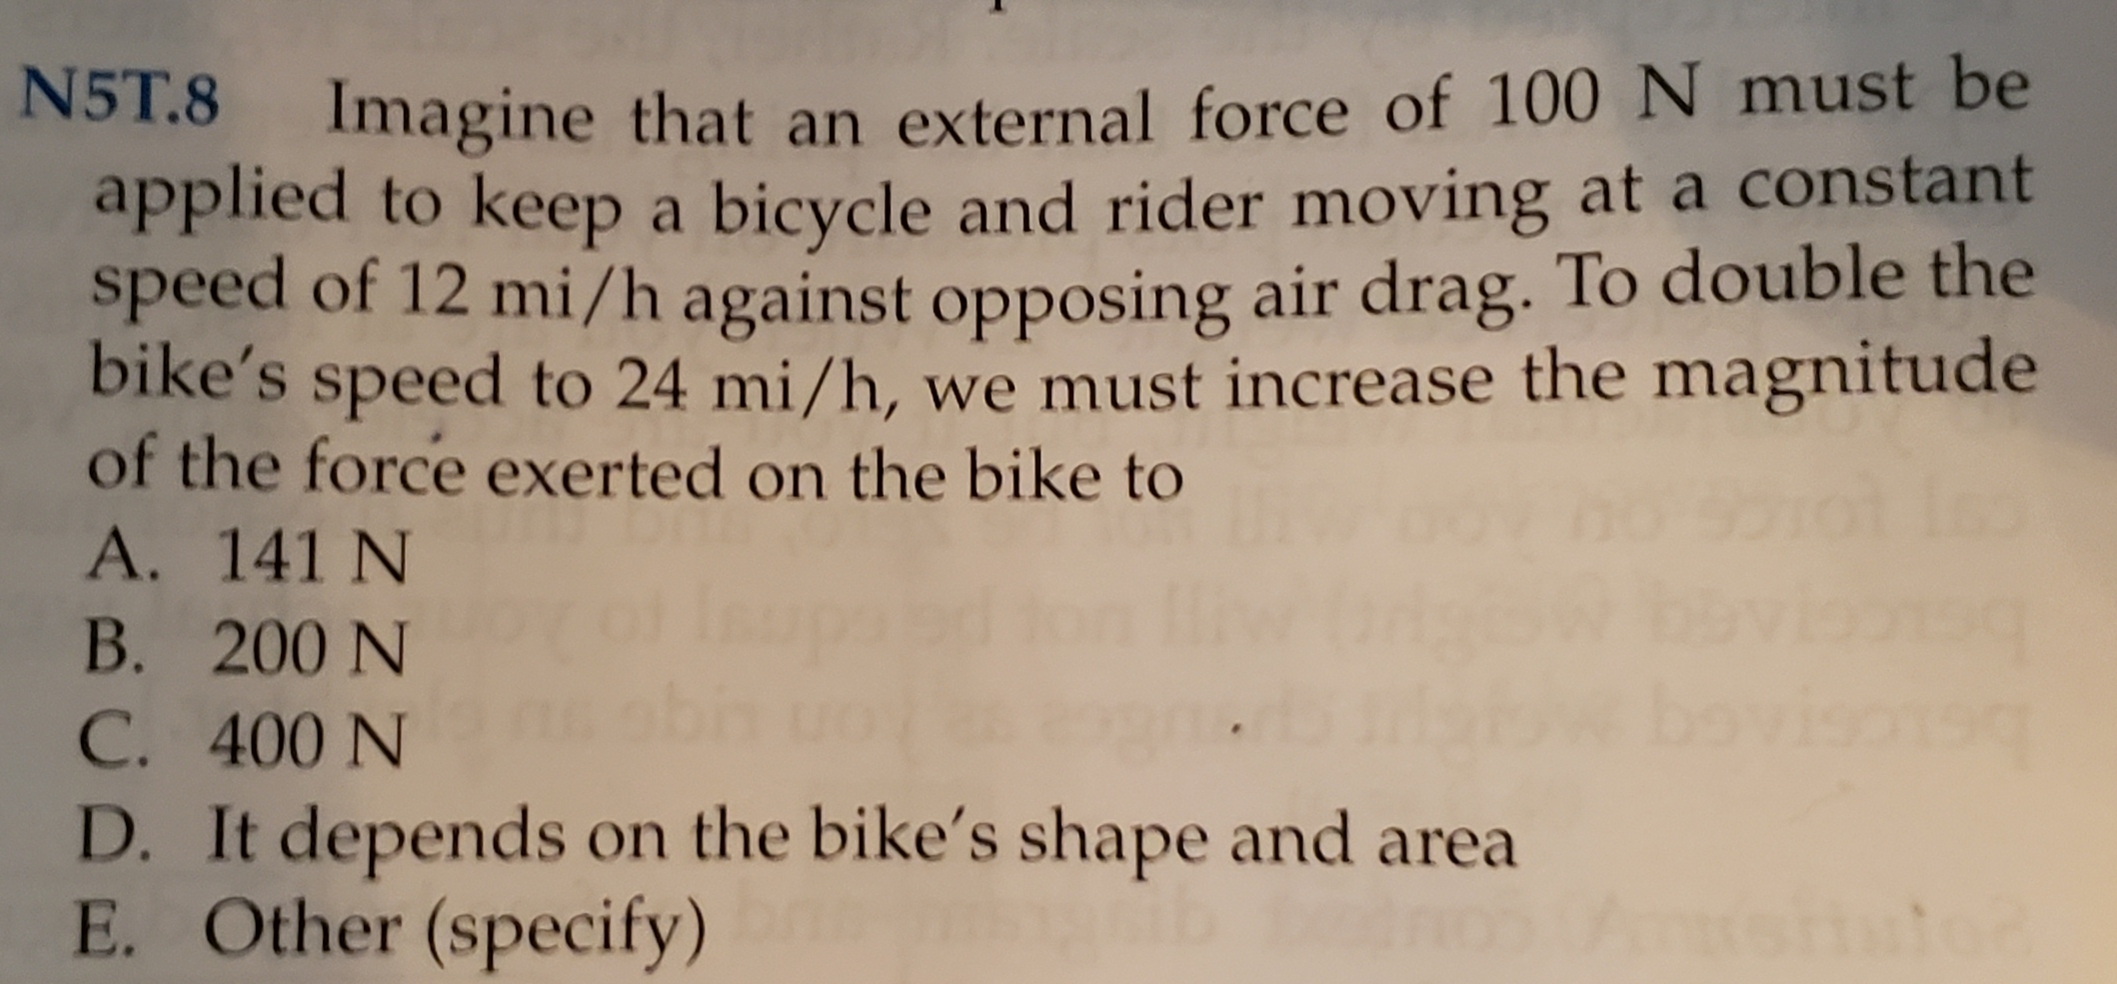 ST.8 Imagine that an external force of 100 N must be
applied to keep a bicycle and rider moving at a constant
speed of 12 mi/h against opposing air drag. To double the
bike's speed to 24 mi/h, we must increase the magnitude
of the force exerted on the bike to
A. 141 N
B. 200 N
be
C. 400 N
D. It depends on the bike's shape and area
E. Other (specify)
